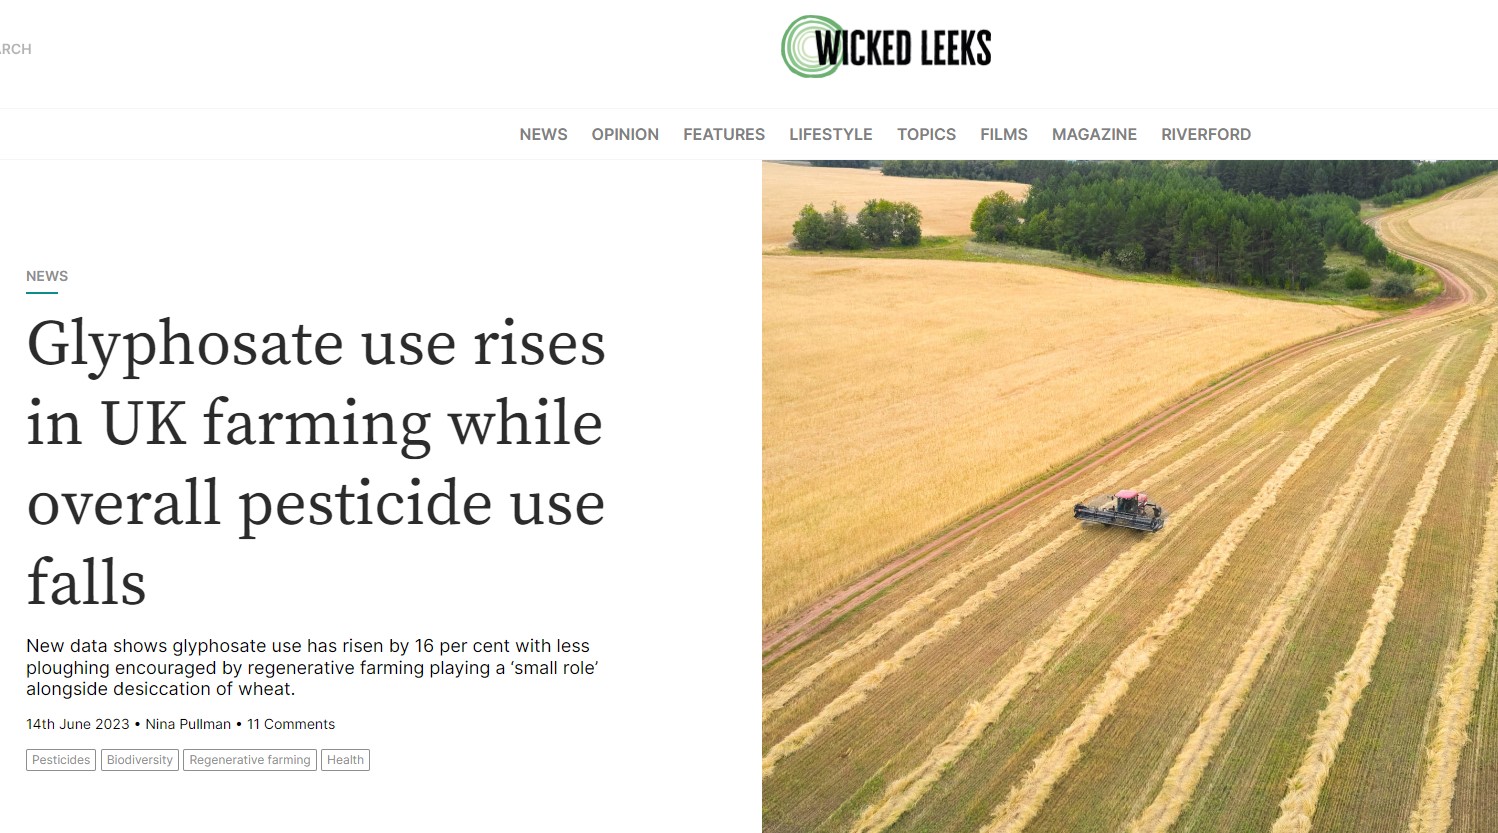 Wicked Leeds: Glyphosate use rises in UK farming while overall pesticide use falls